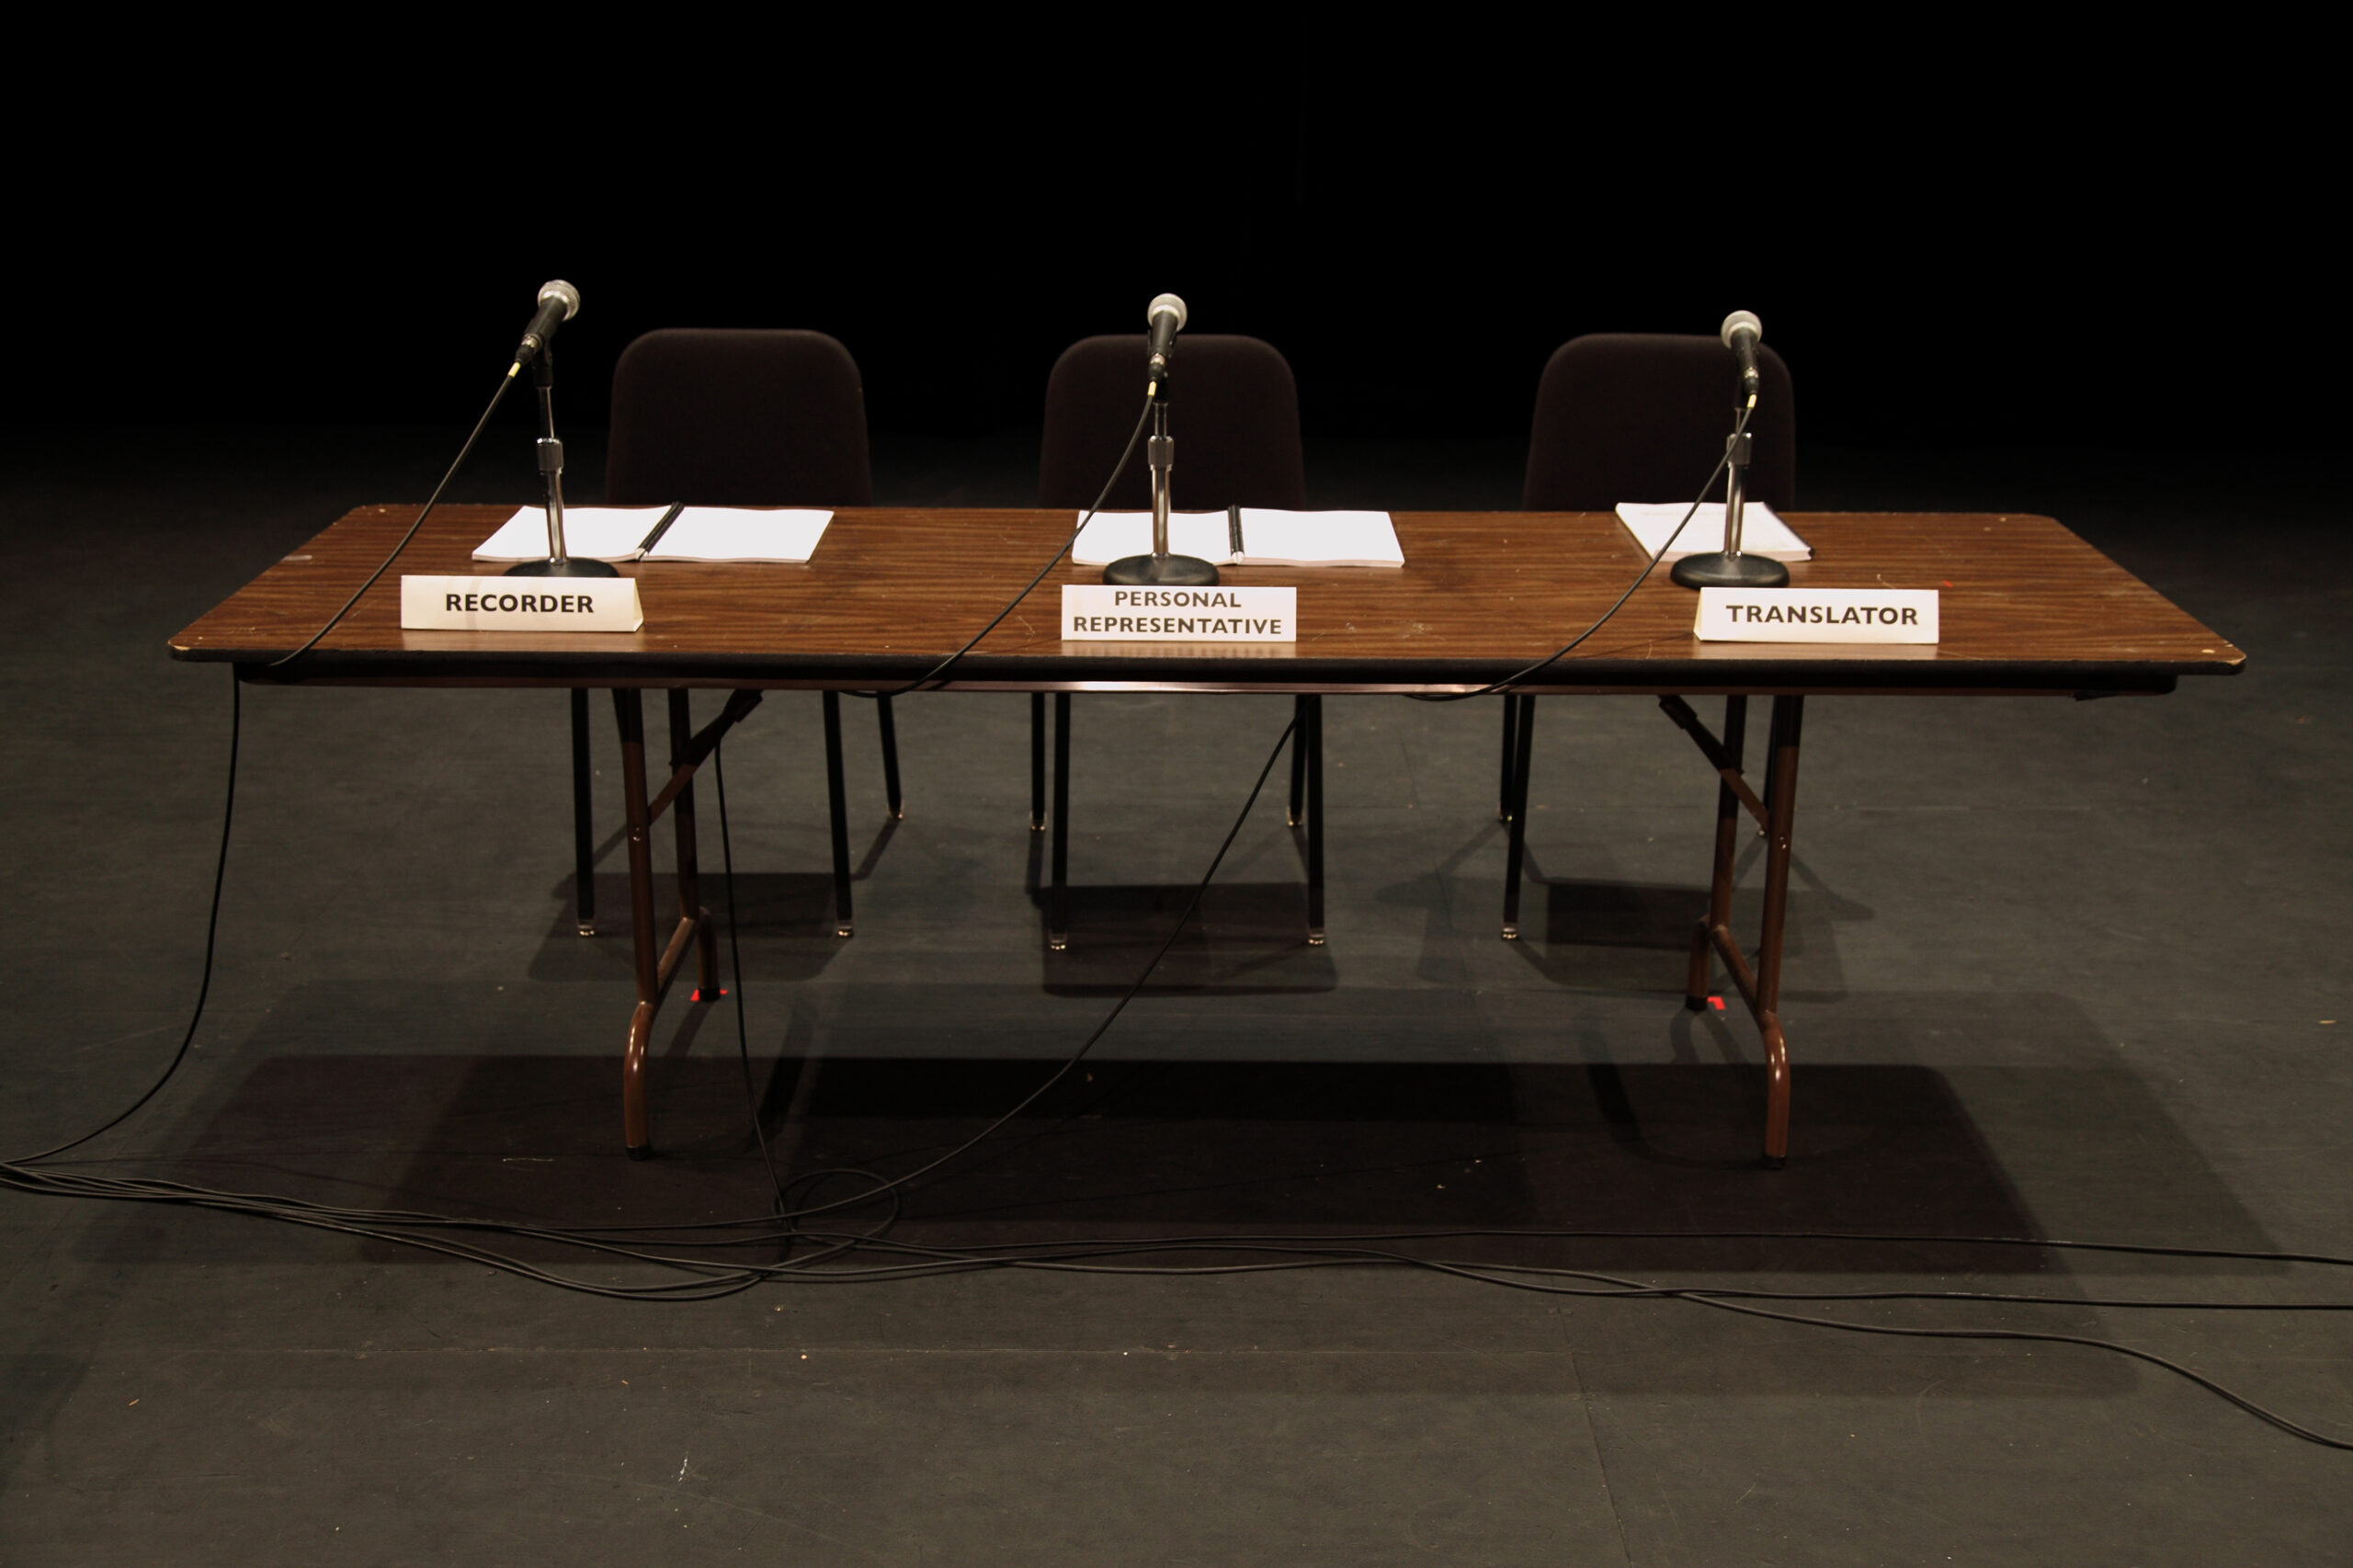 A table with three microphones, chairs and named placards. The seats are empty